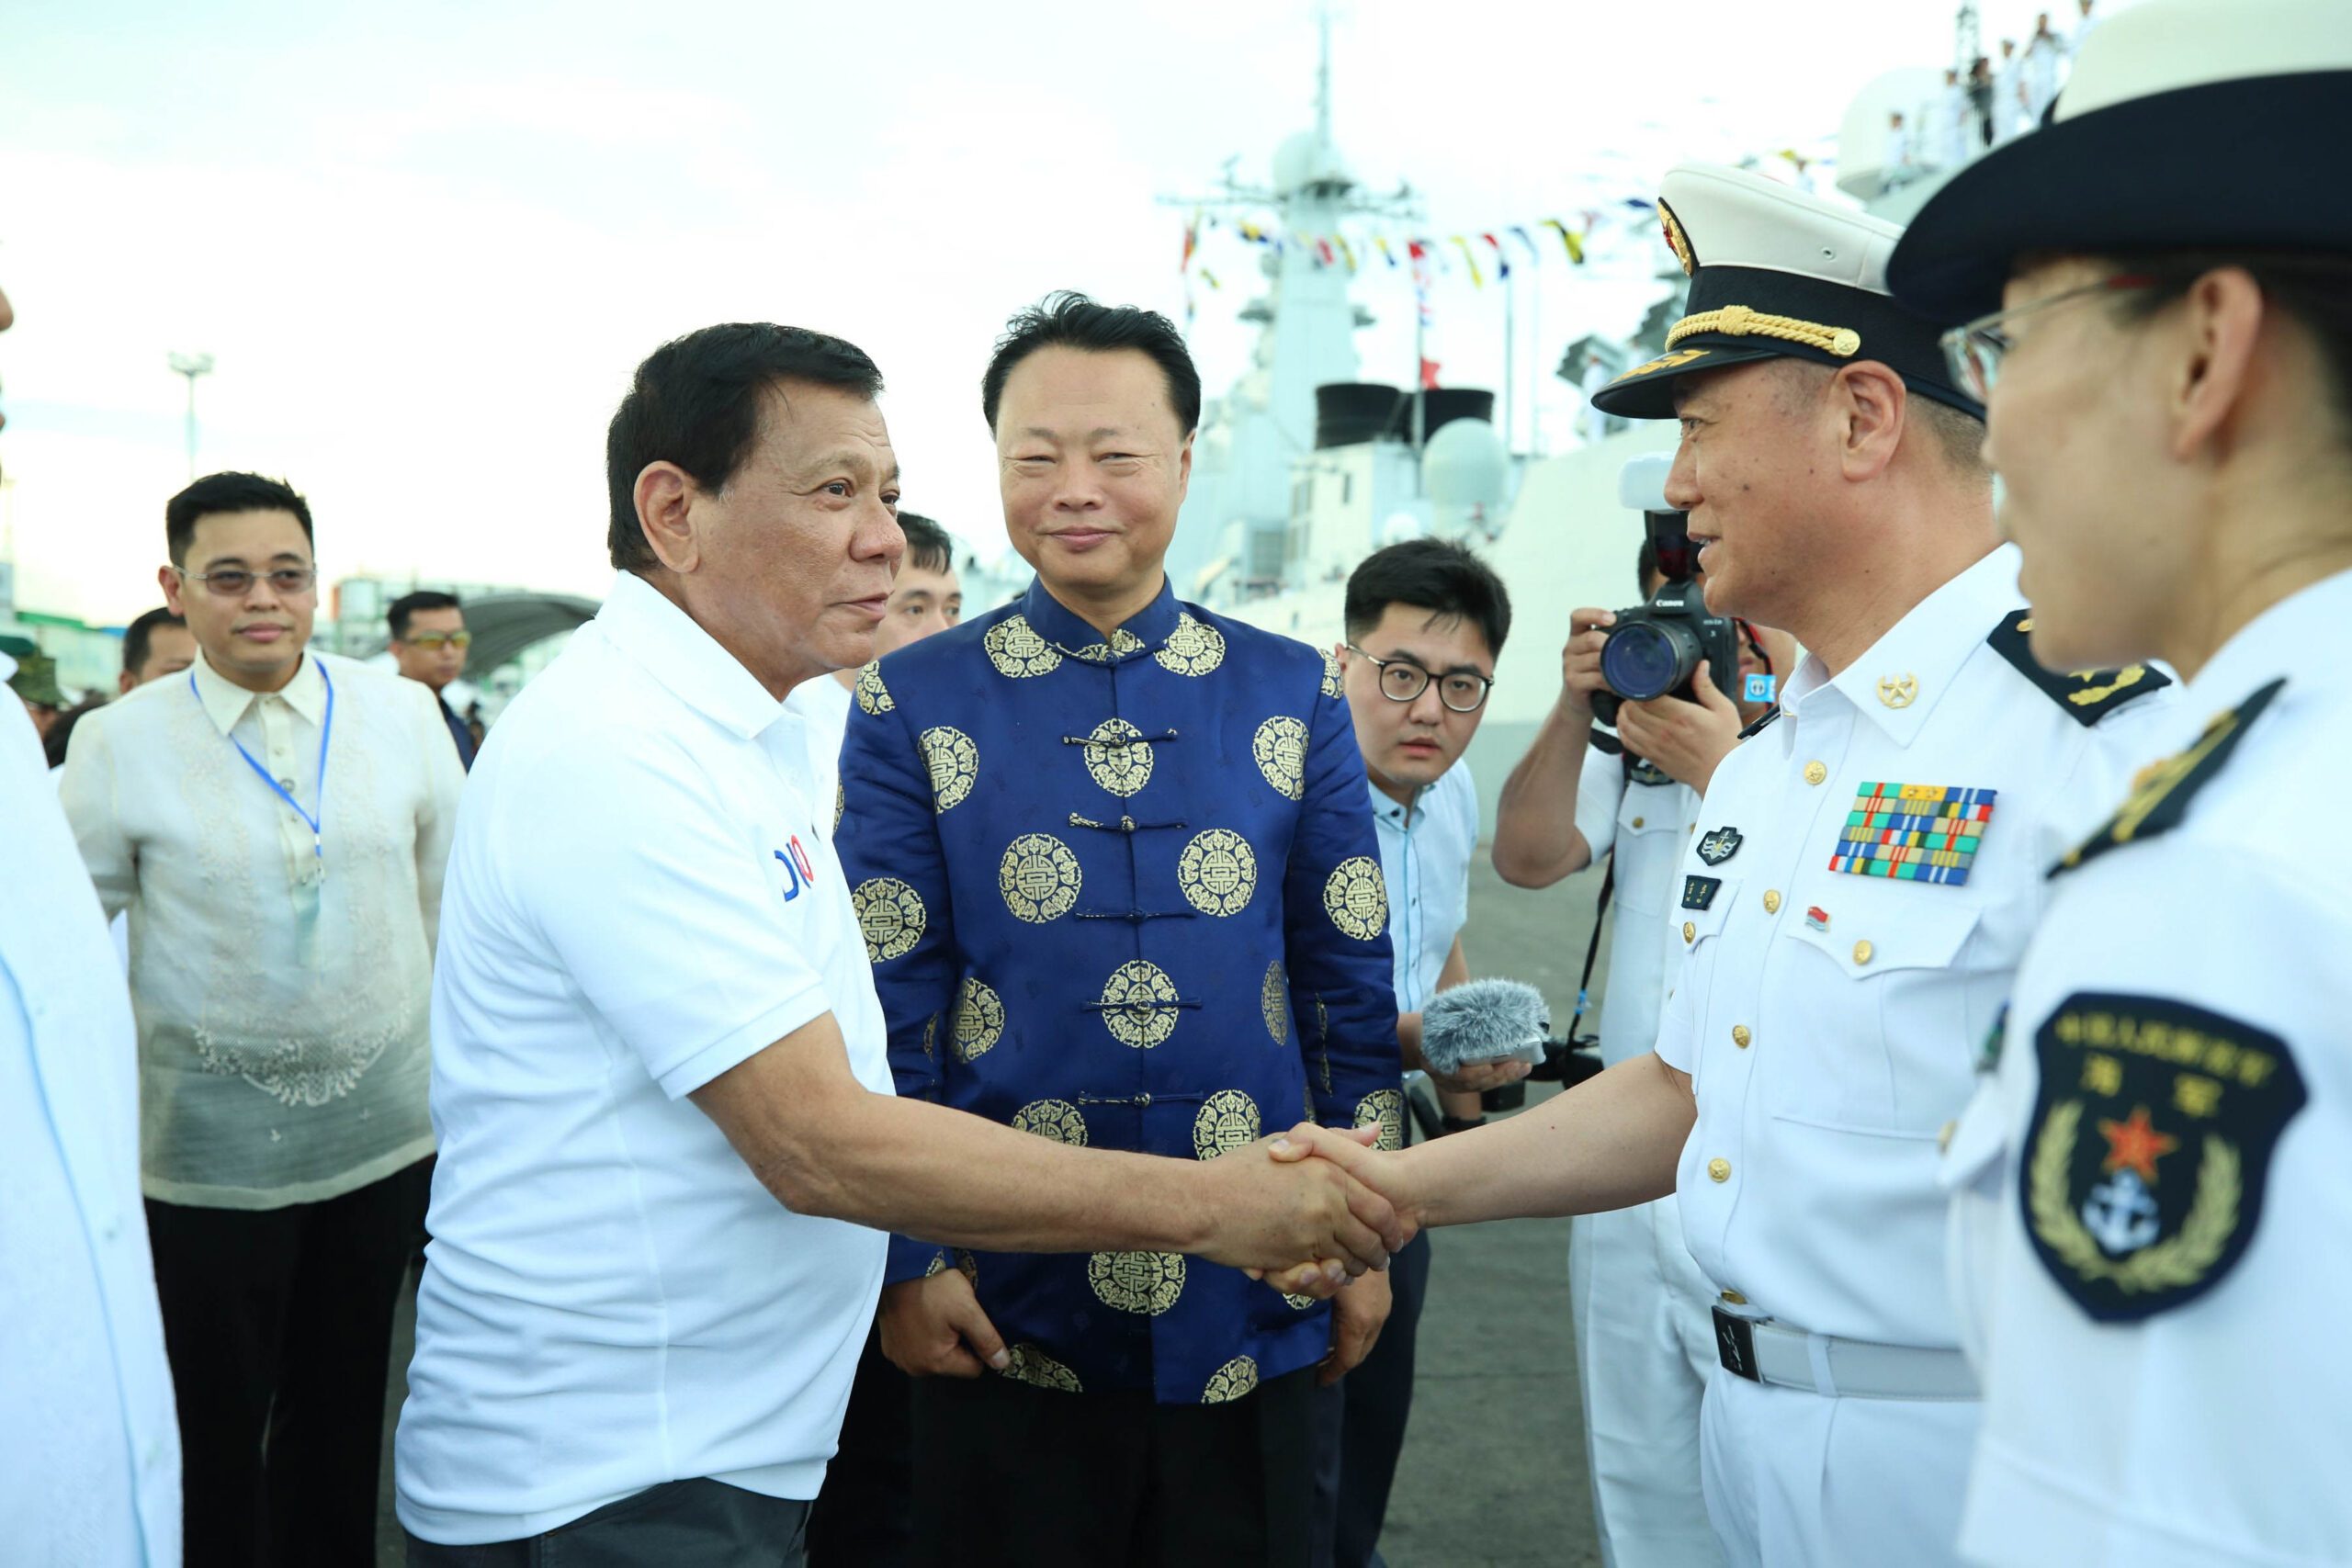 Pag-asa is ours, PH says amid China remarks